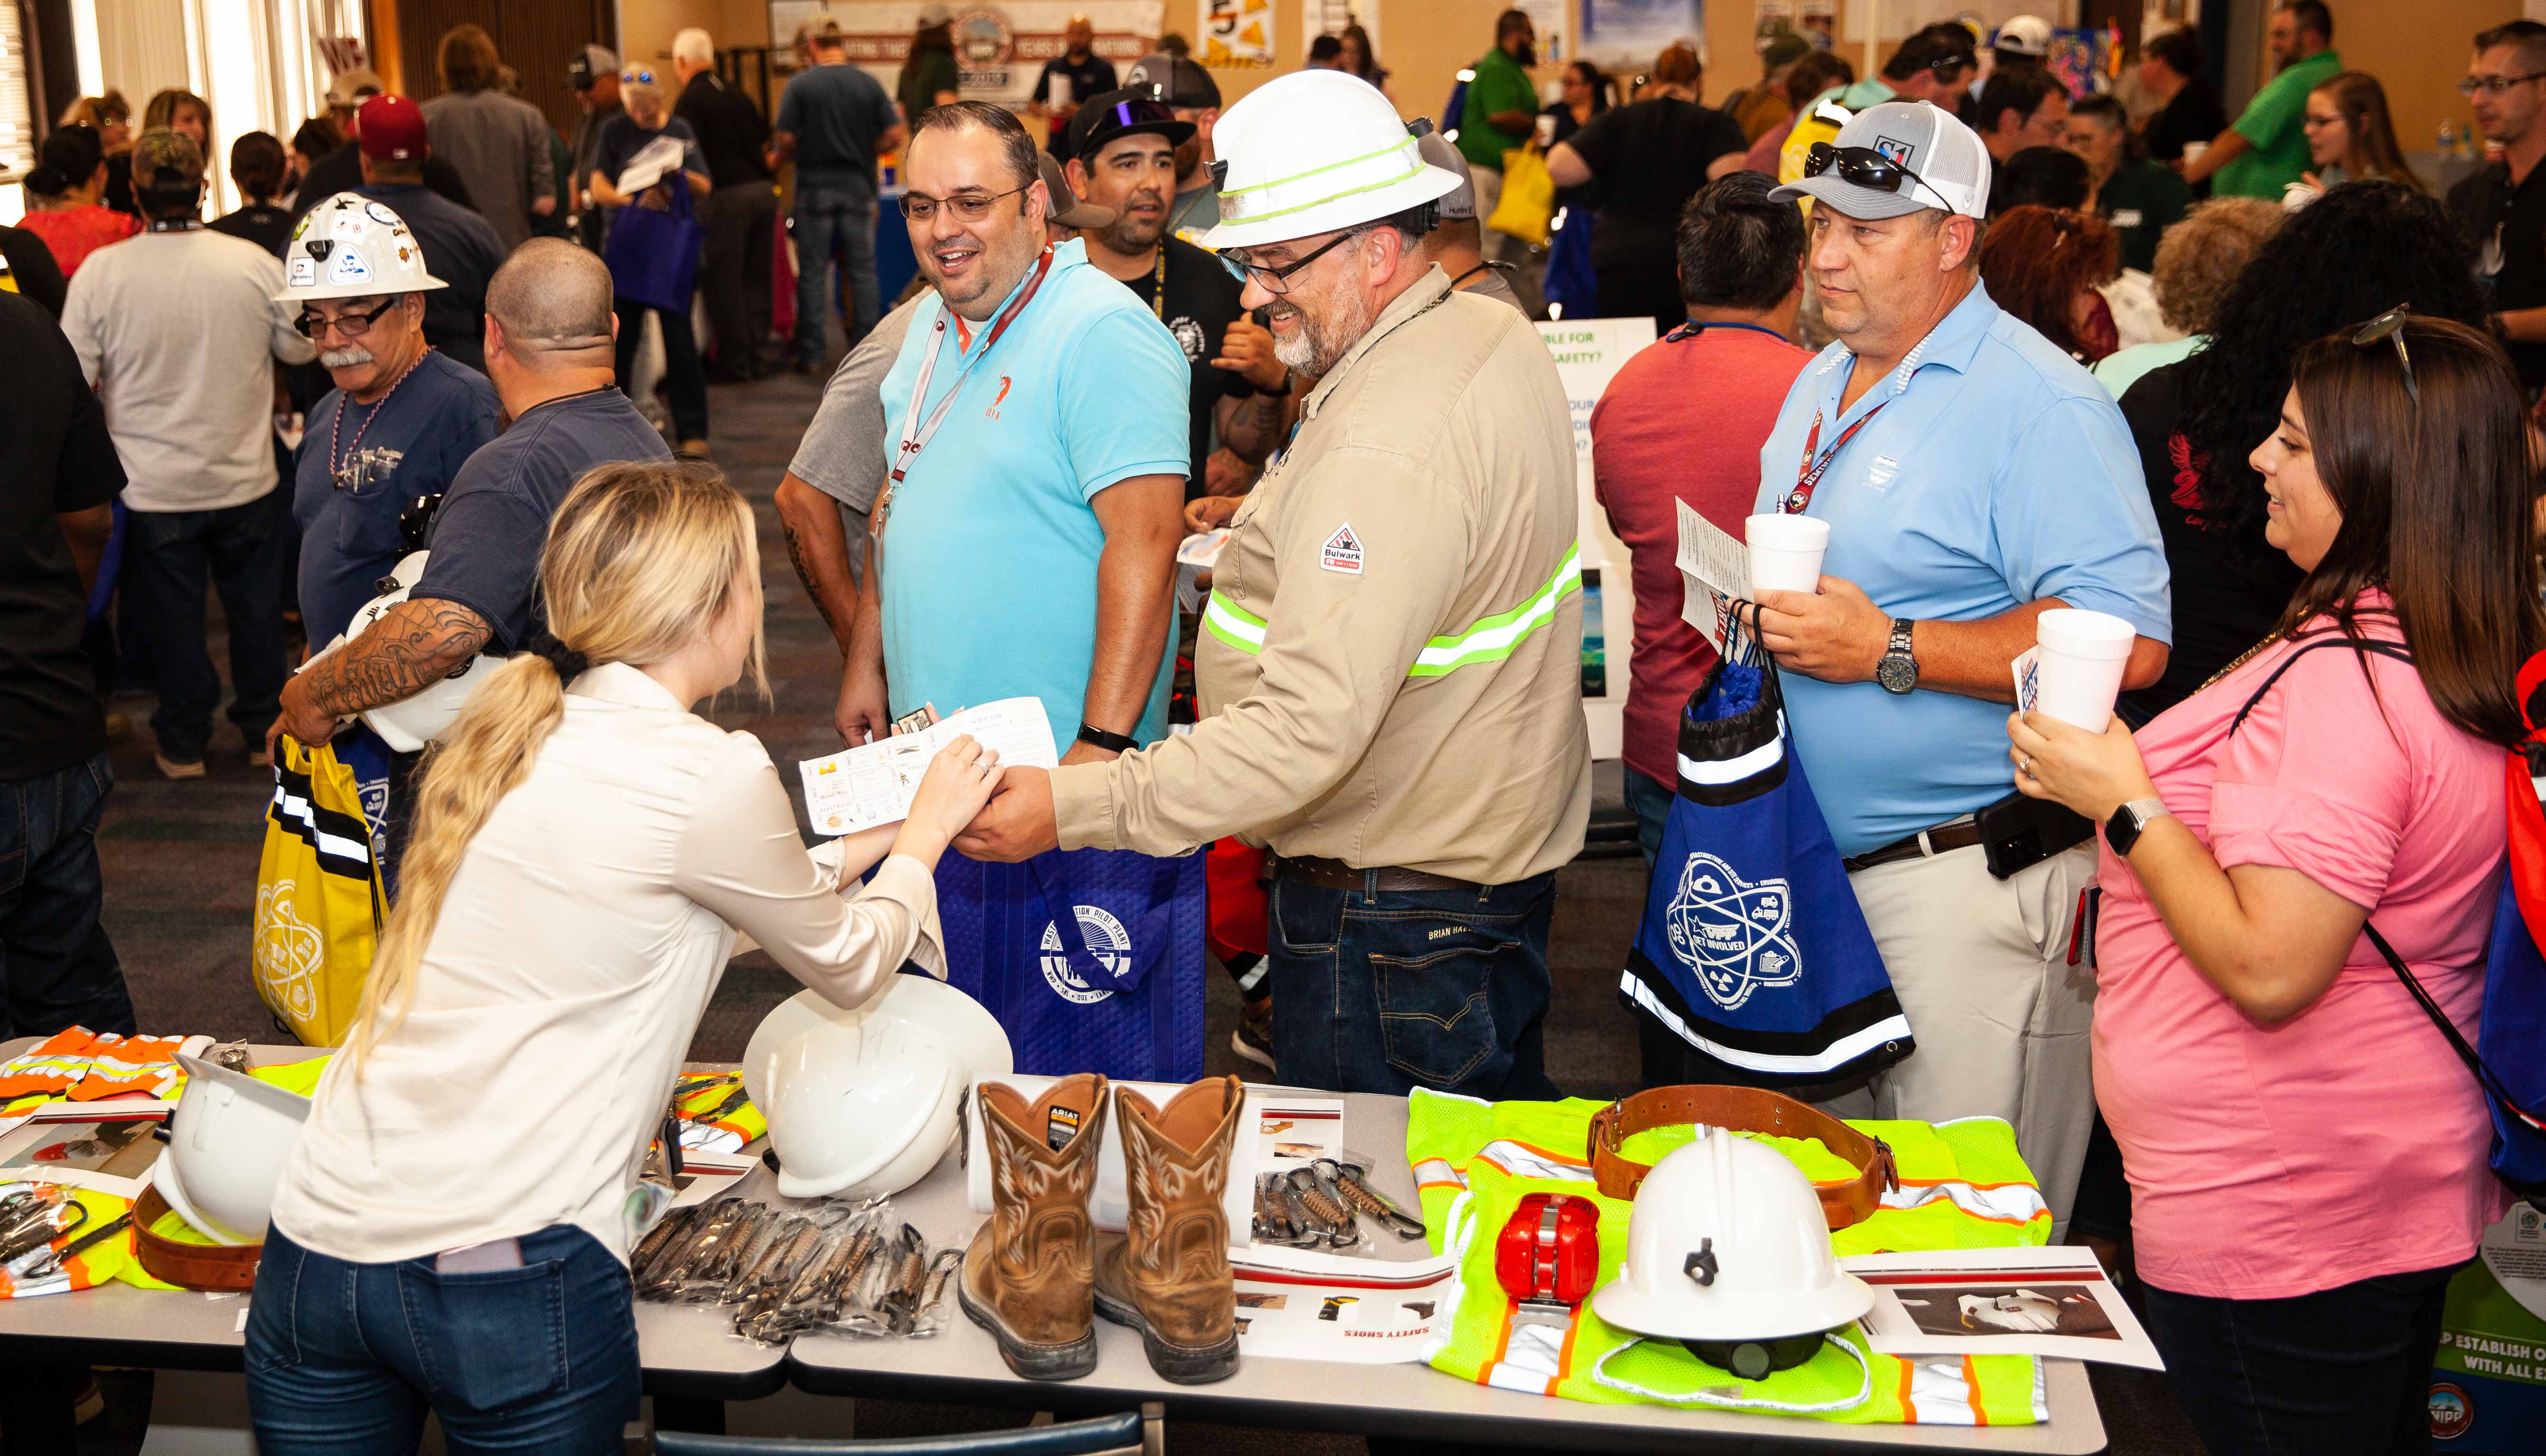 Employees at the WIPP Safety Fair